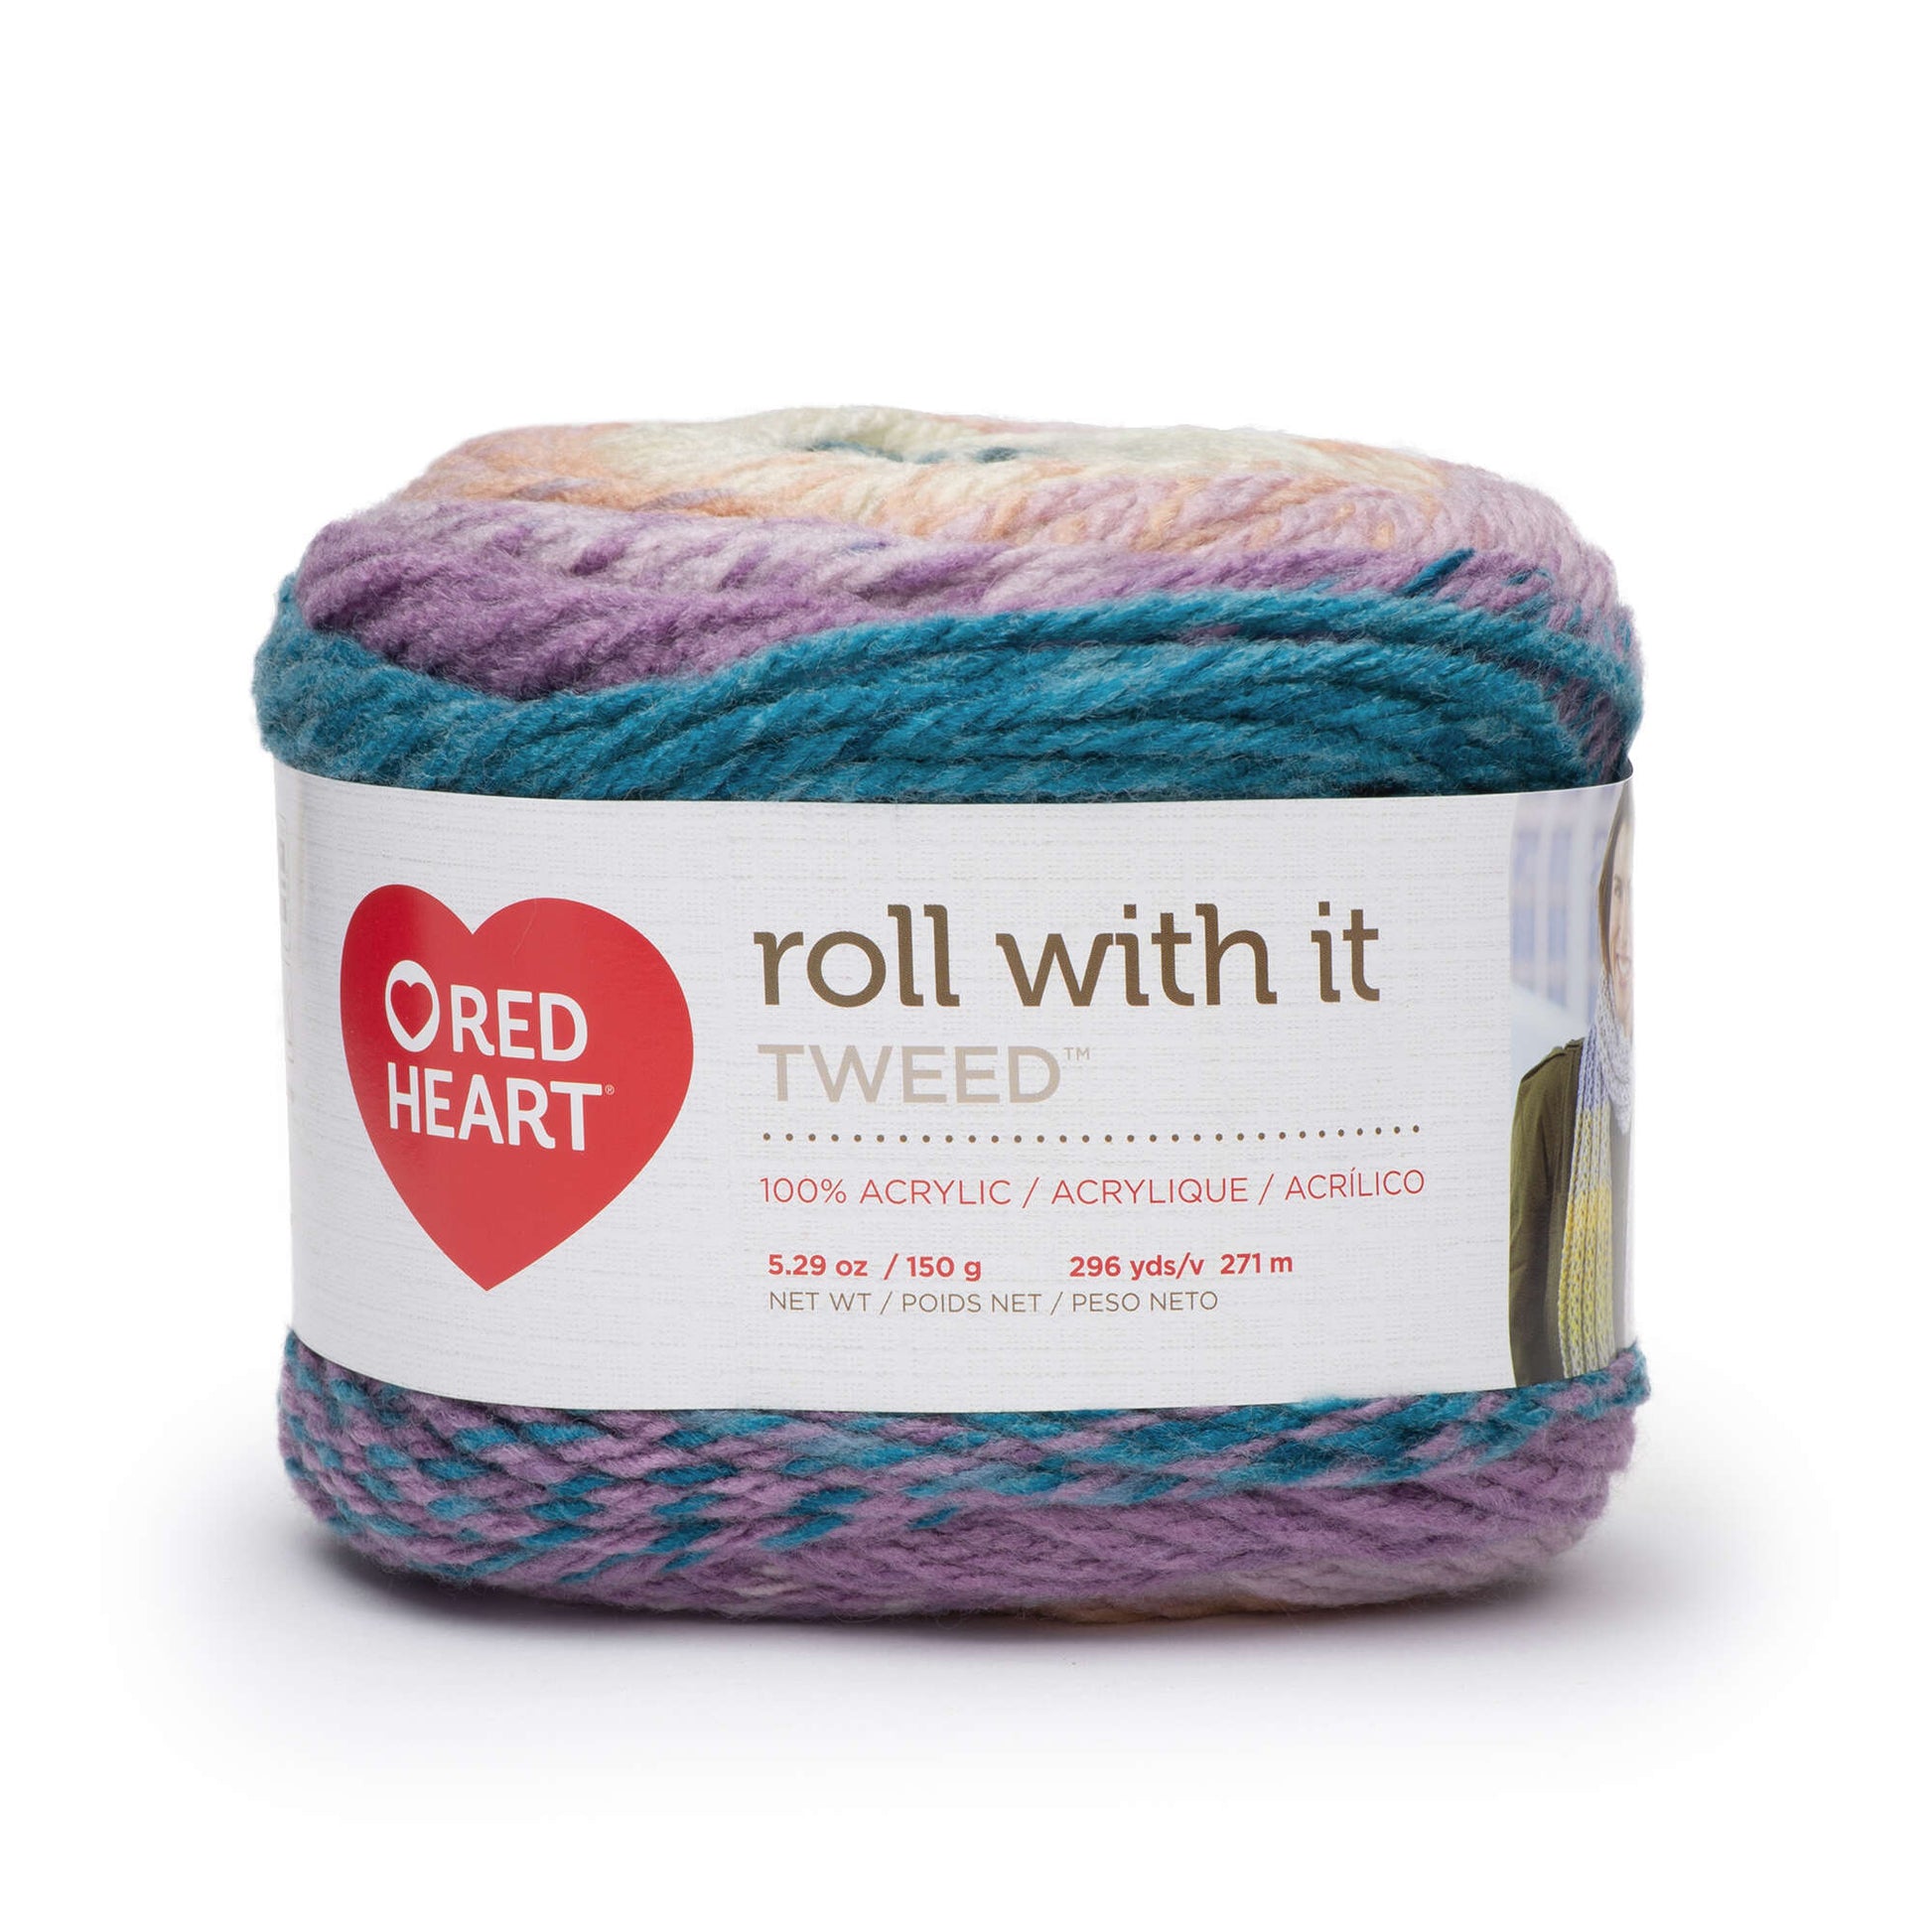 Red Heart Roll With It Tweed Yarn - Clearance shades Potpourri